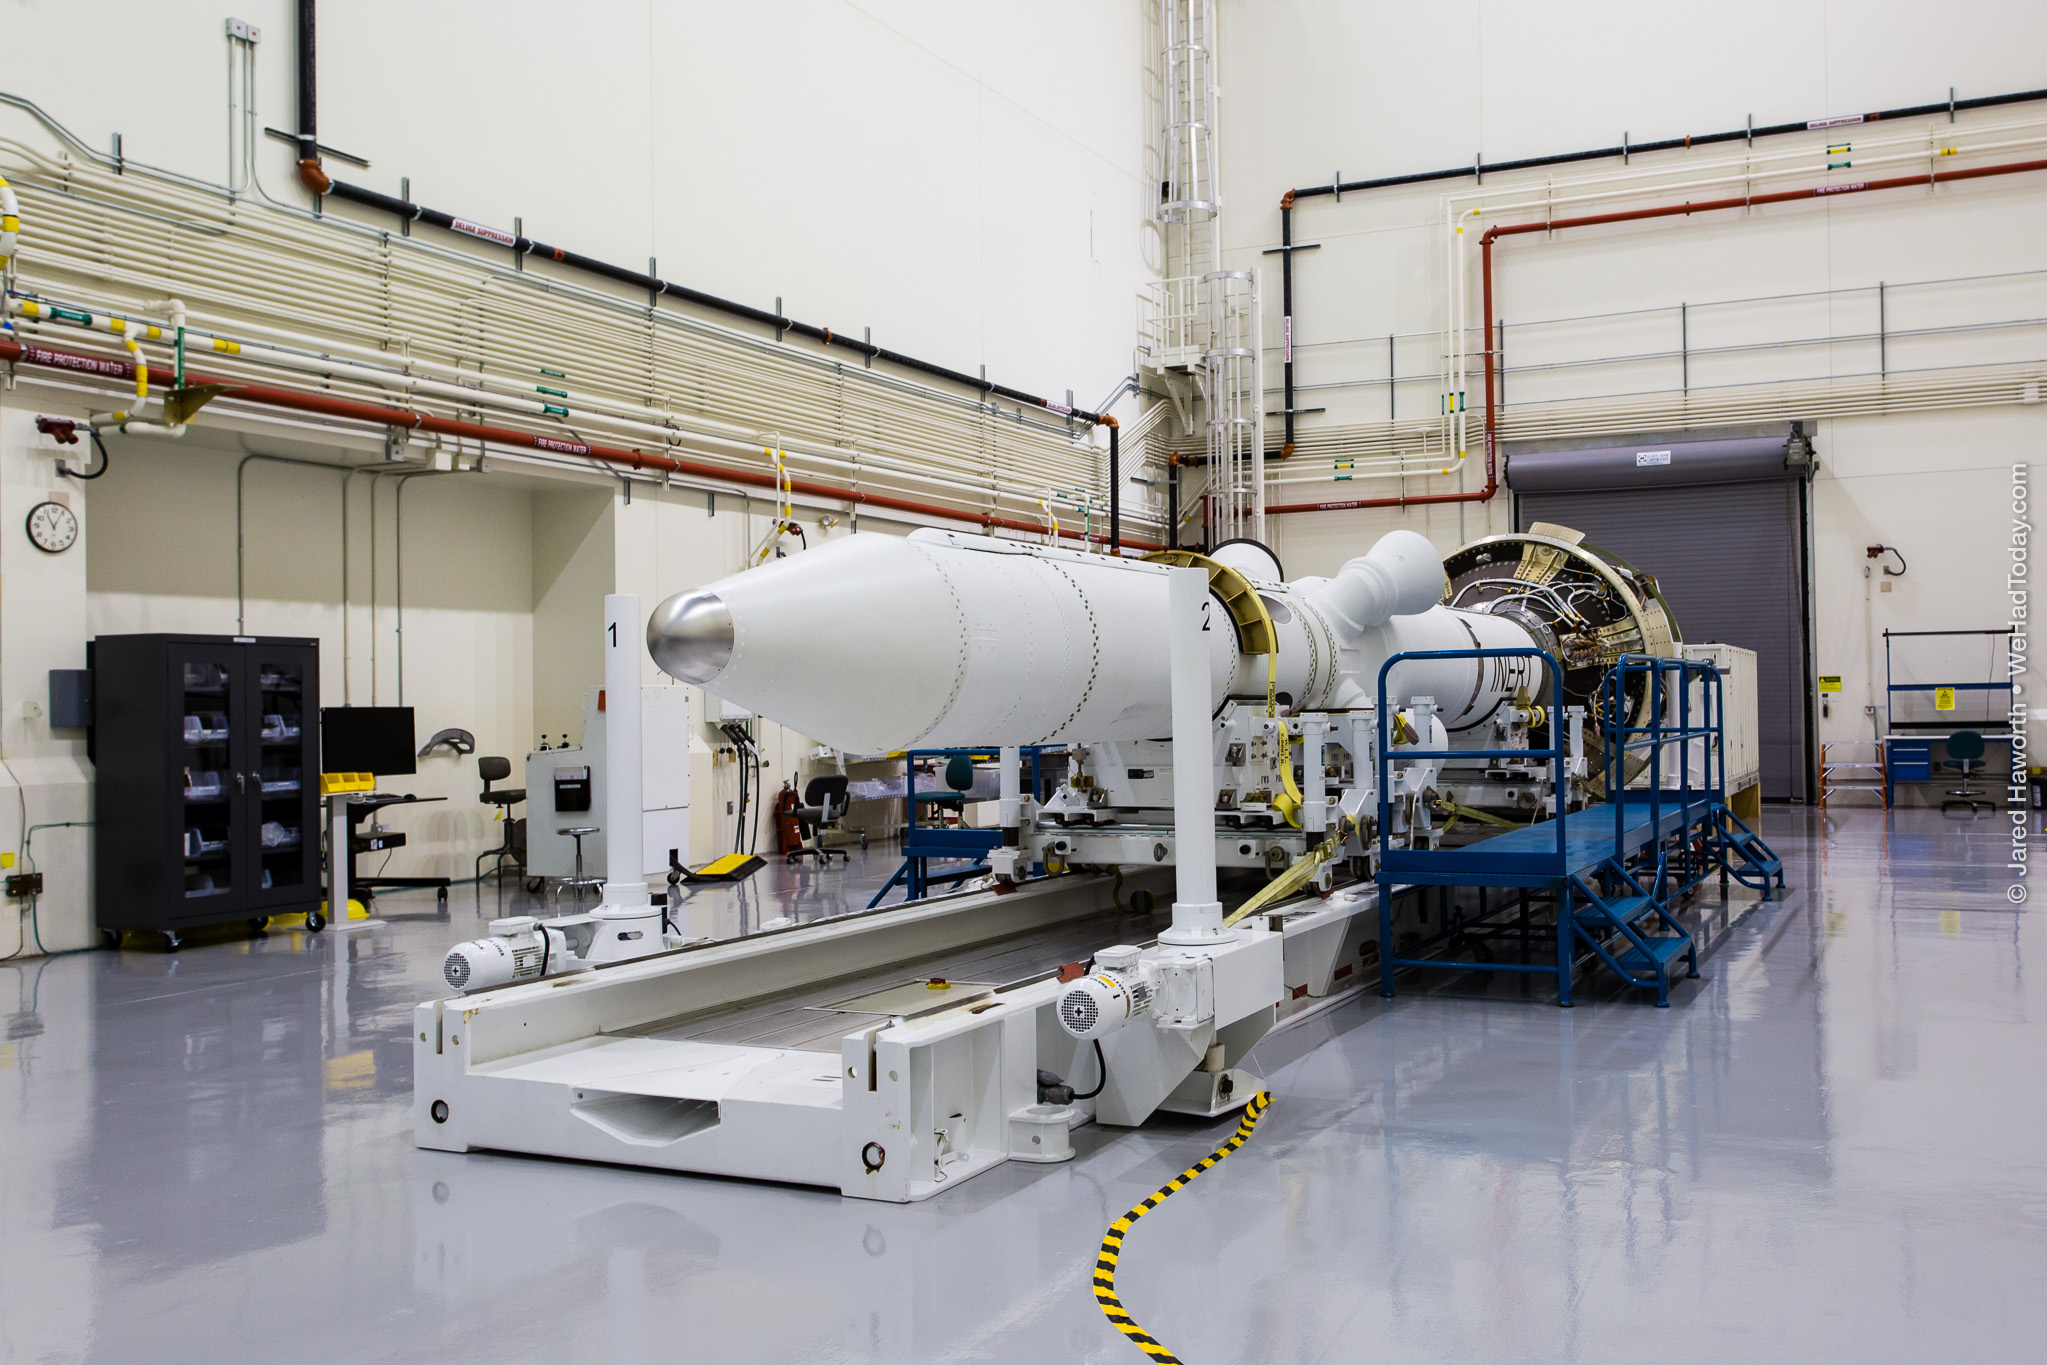 The Launch Abort System waiting to be installed atop the Orion multipurpose crew vehicle.